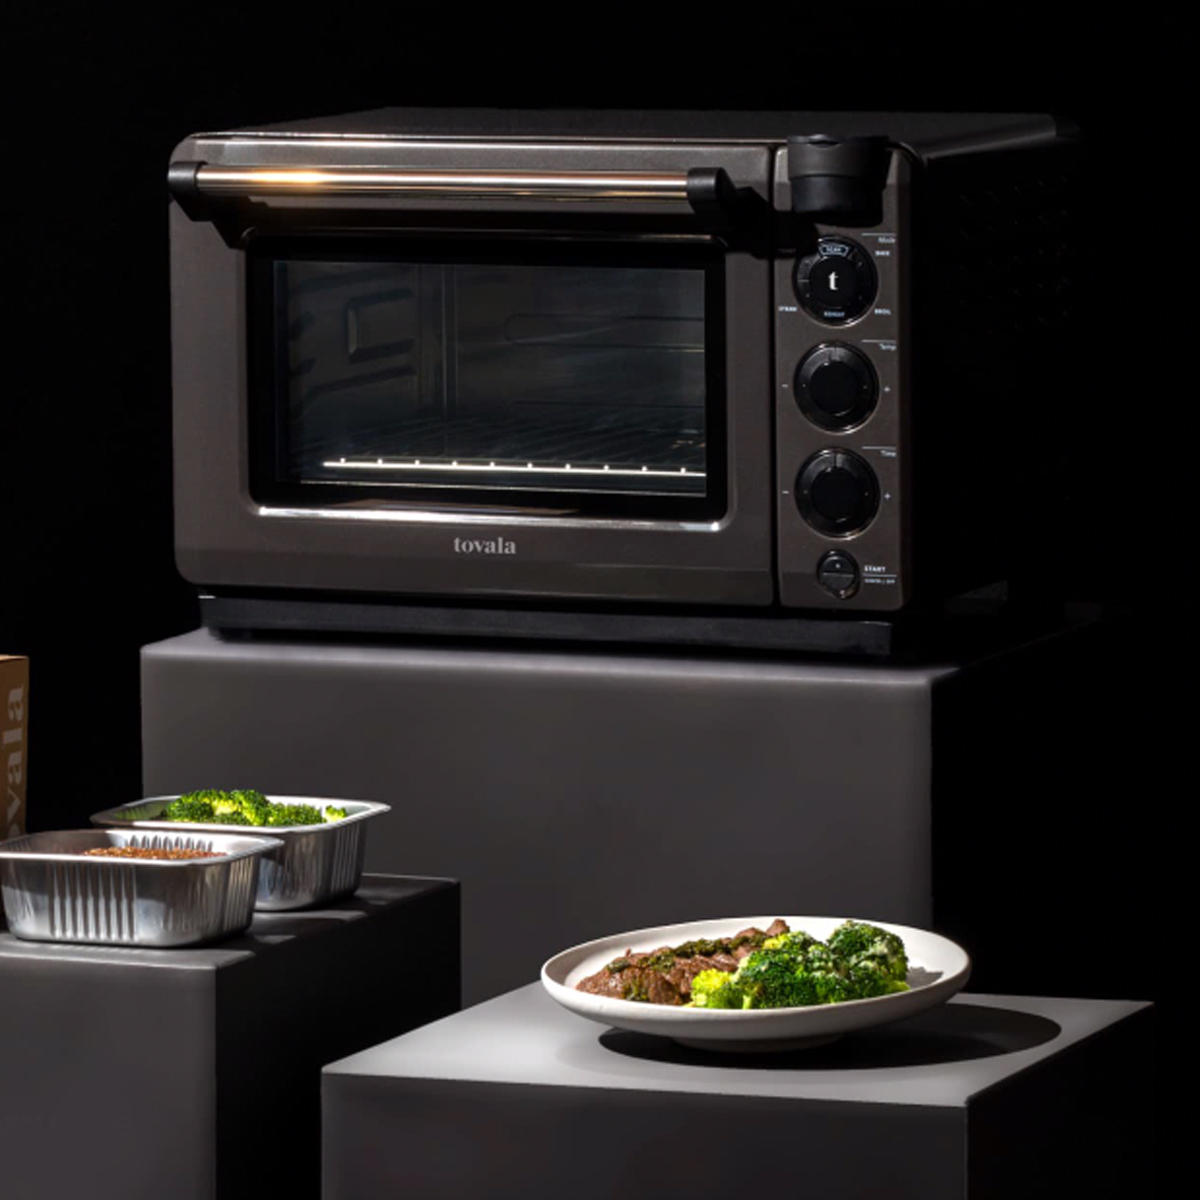 Pony up for a meal delivery service if you want the Tovala Smart Oven - CNET